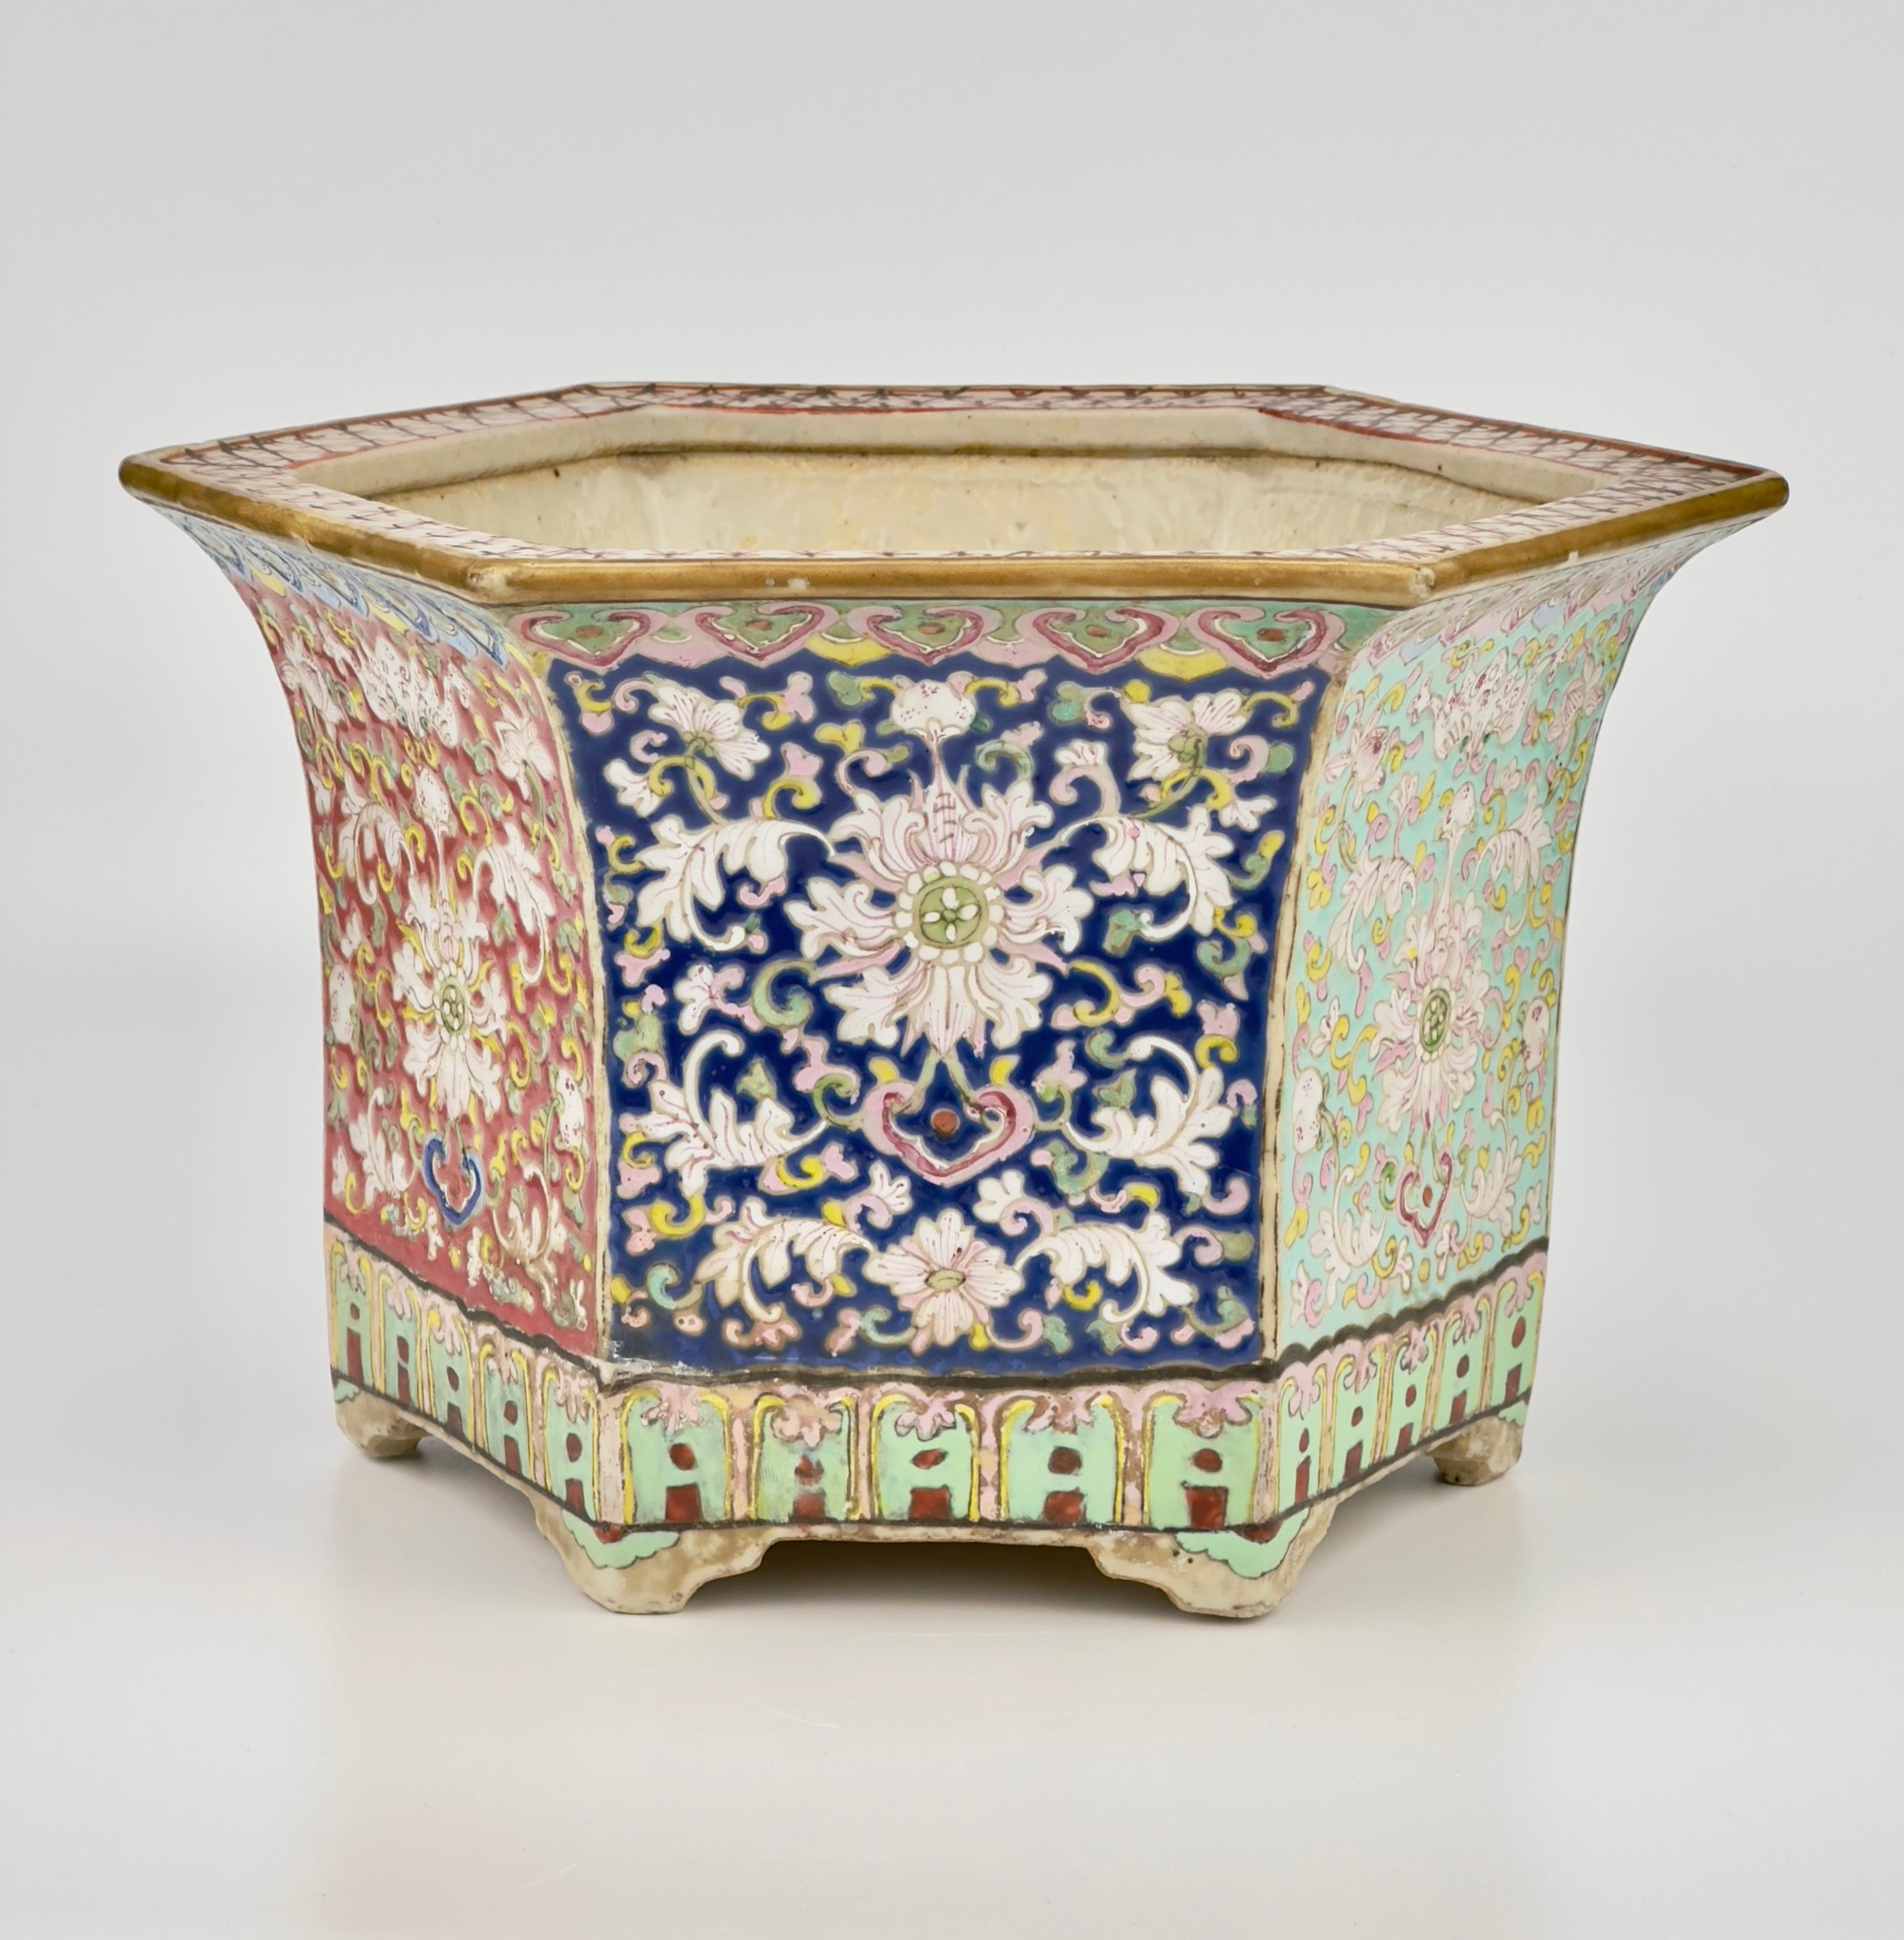 A Chinese jardinière rarely in six colors, hexagonal, China, presumably 19th century.

Period: Qing Dynasty
Type: Jardinière
Medium: Famille rose
Size : 17 cm(Height) x 24cm(Mouth Diameter)
Condition: Good


* Famille Rose﻿

The Famille Rose, from